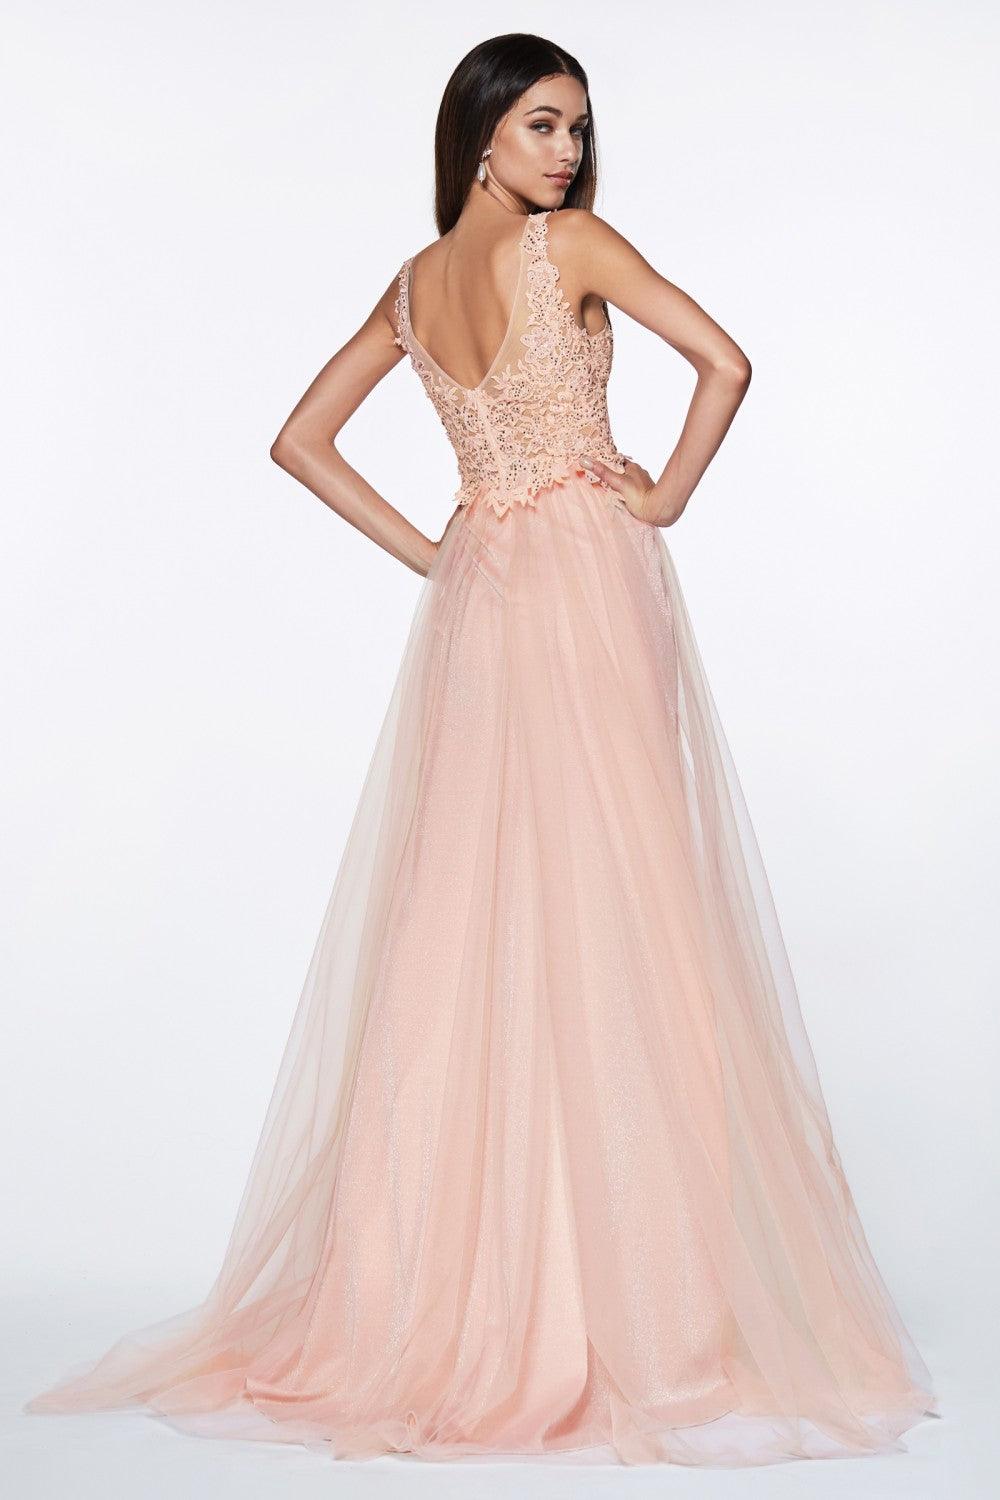 Sleeveless Long Formal Dress Prom with High Slit - The Dress Outlet Cinderella Divine